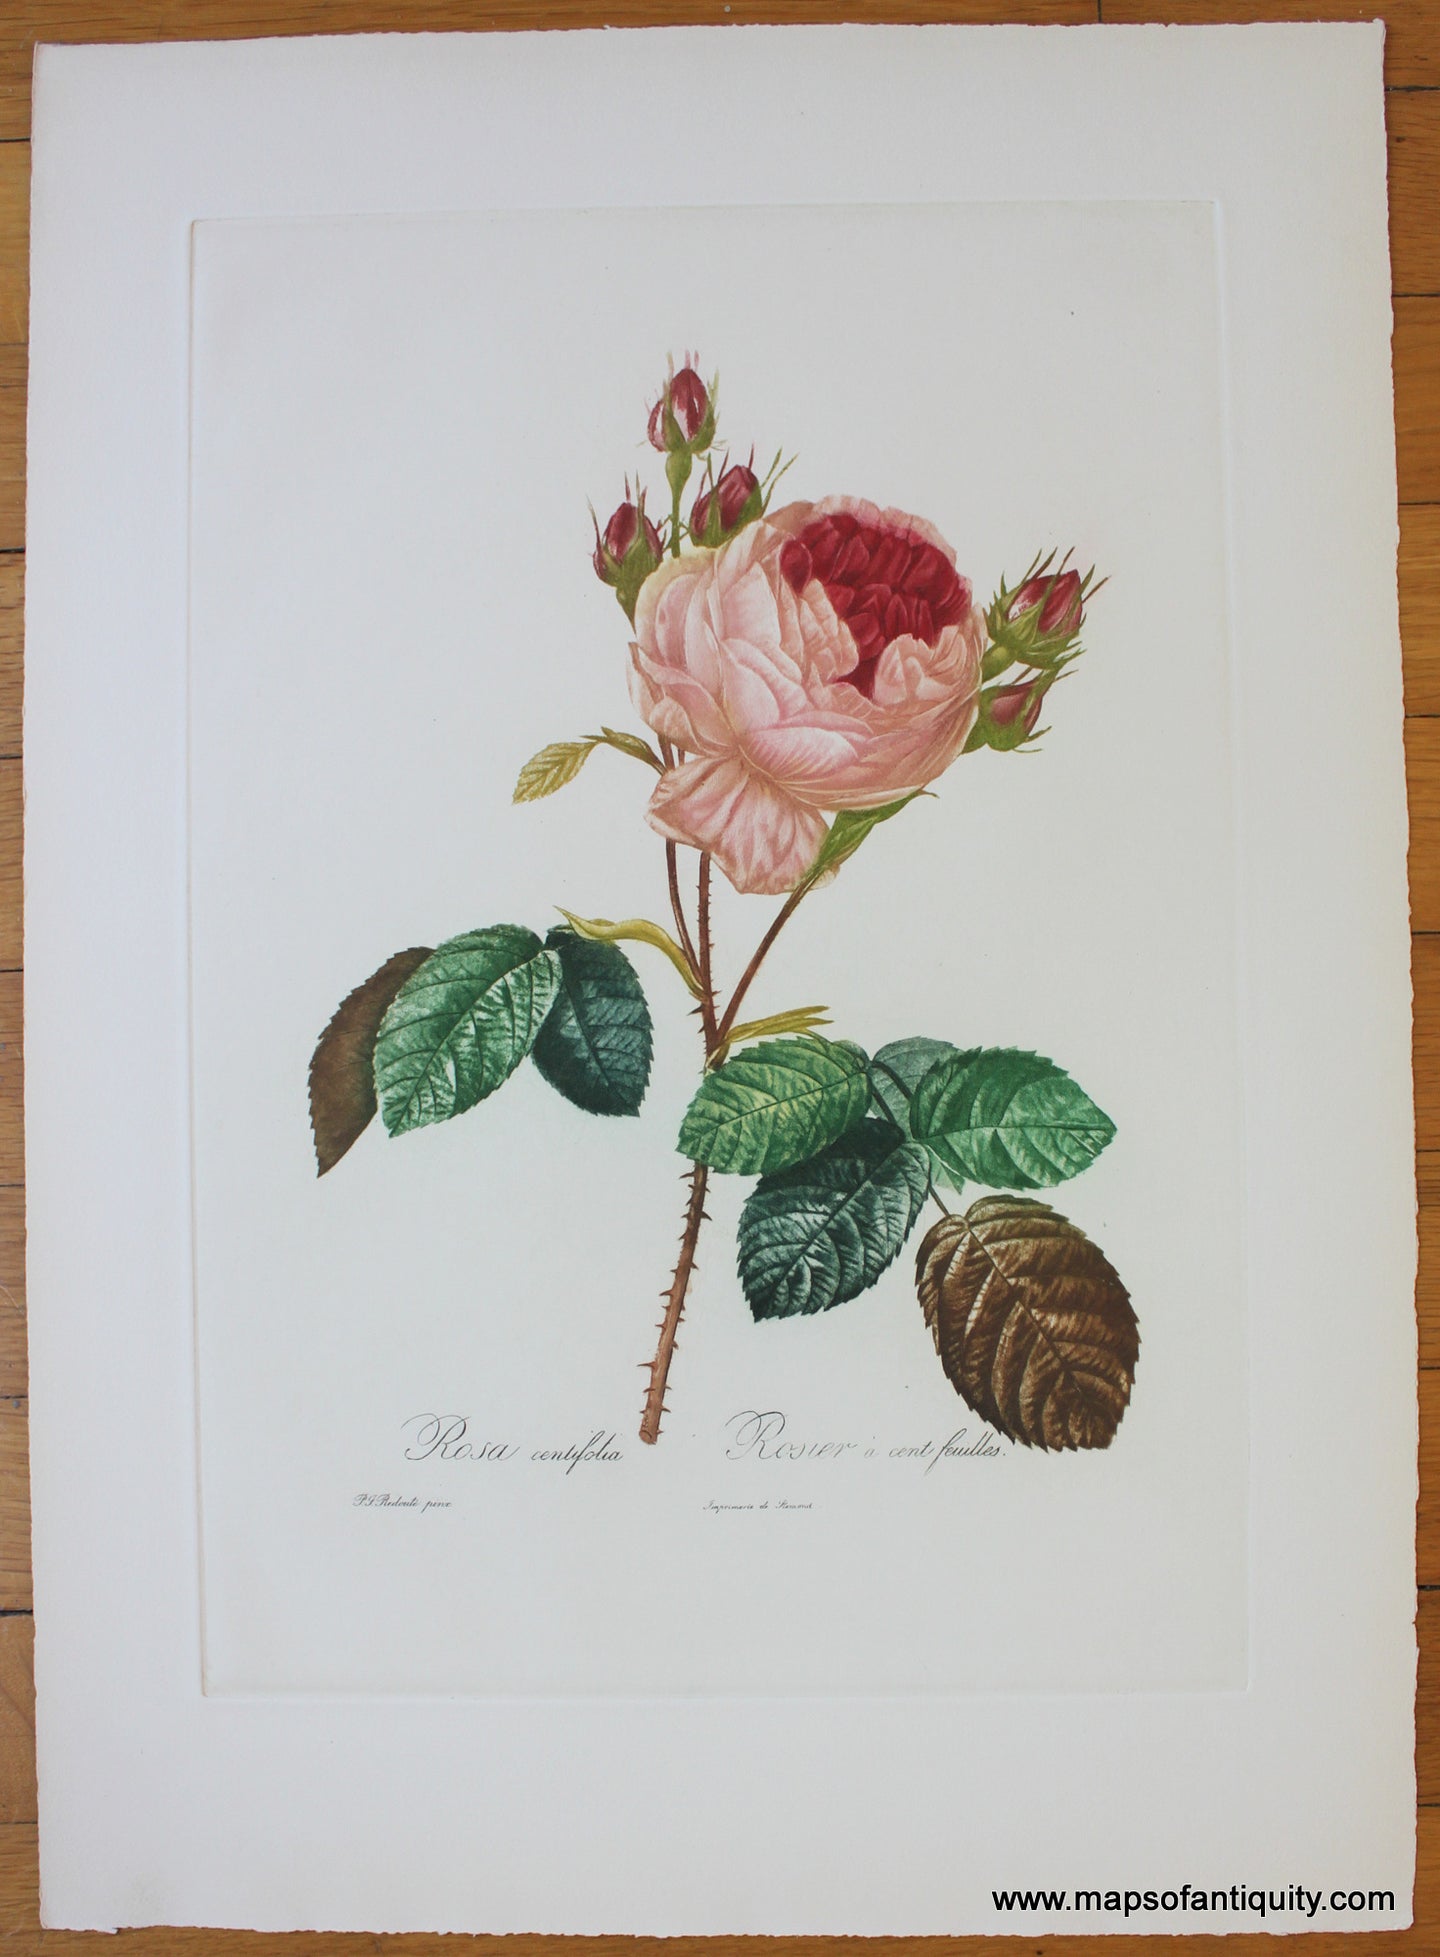 Antique-Lithograph-Print-Prints-Illustration-Illustrations-Botanical-Rose-Roses-Redoute-Paris-Etching-Society-Camilla-Lucas-Maps-of-Antiquity